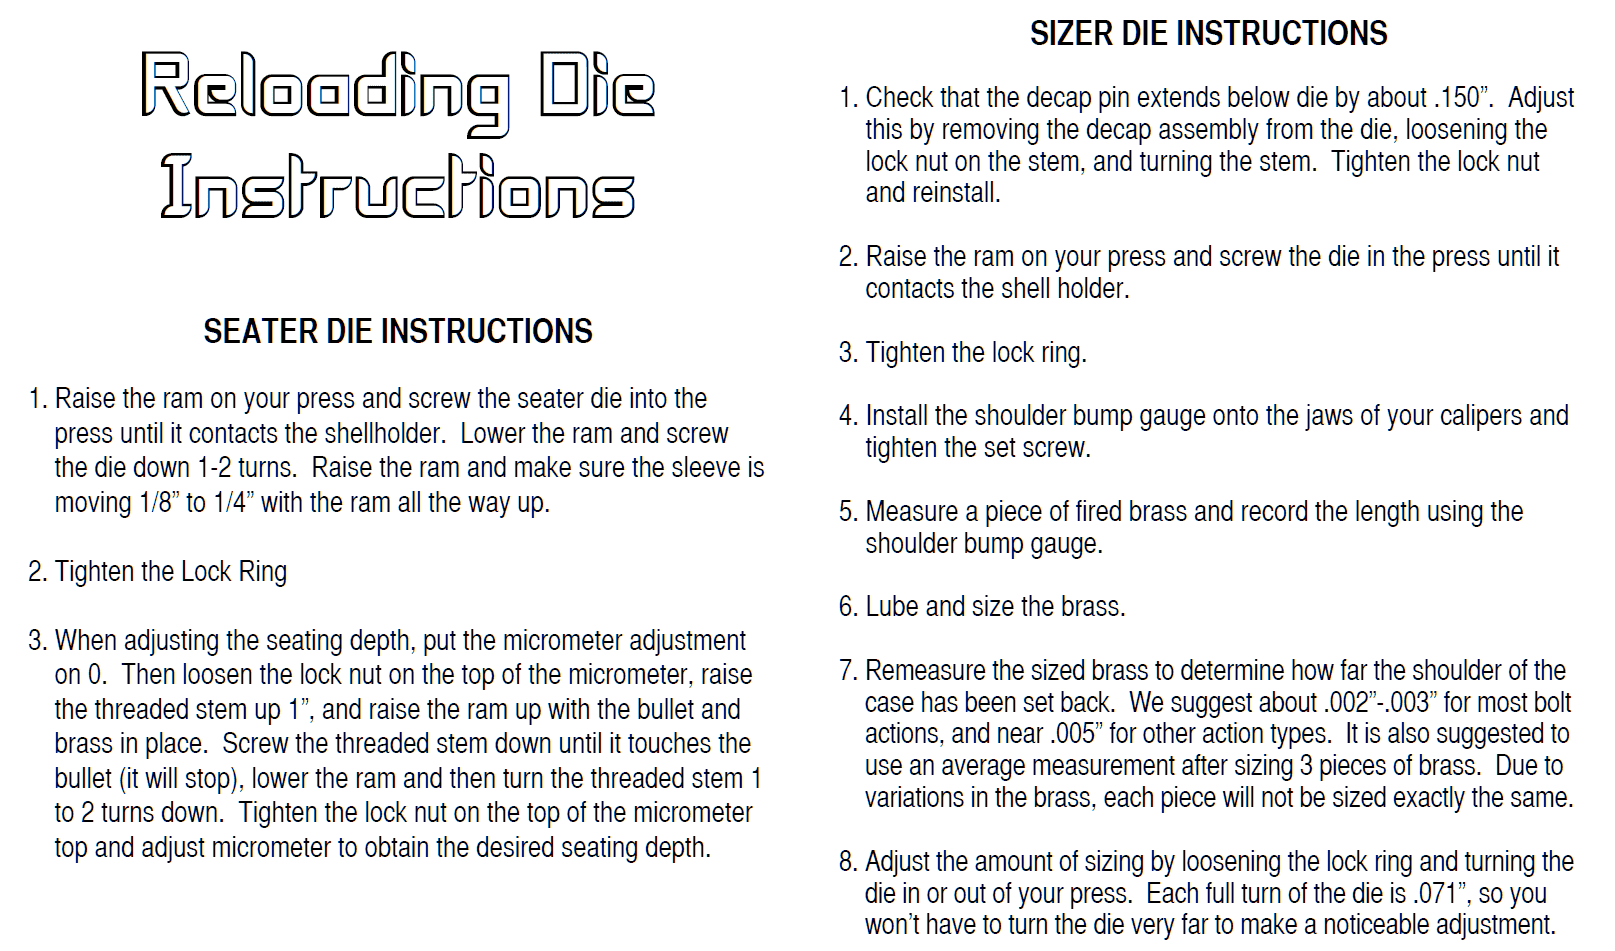 ReloadingDieInstructions.png